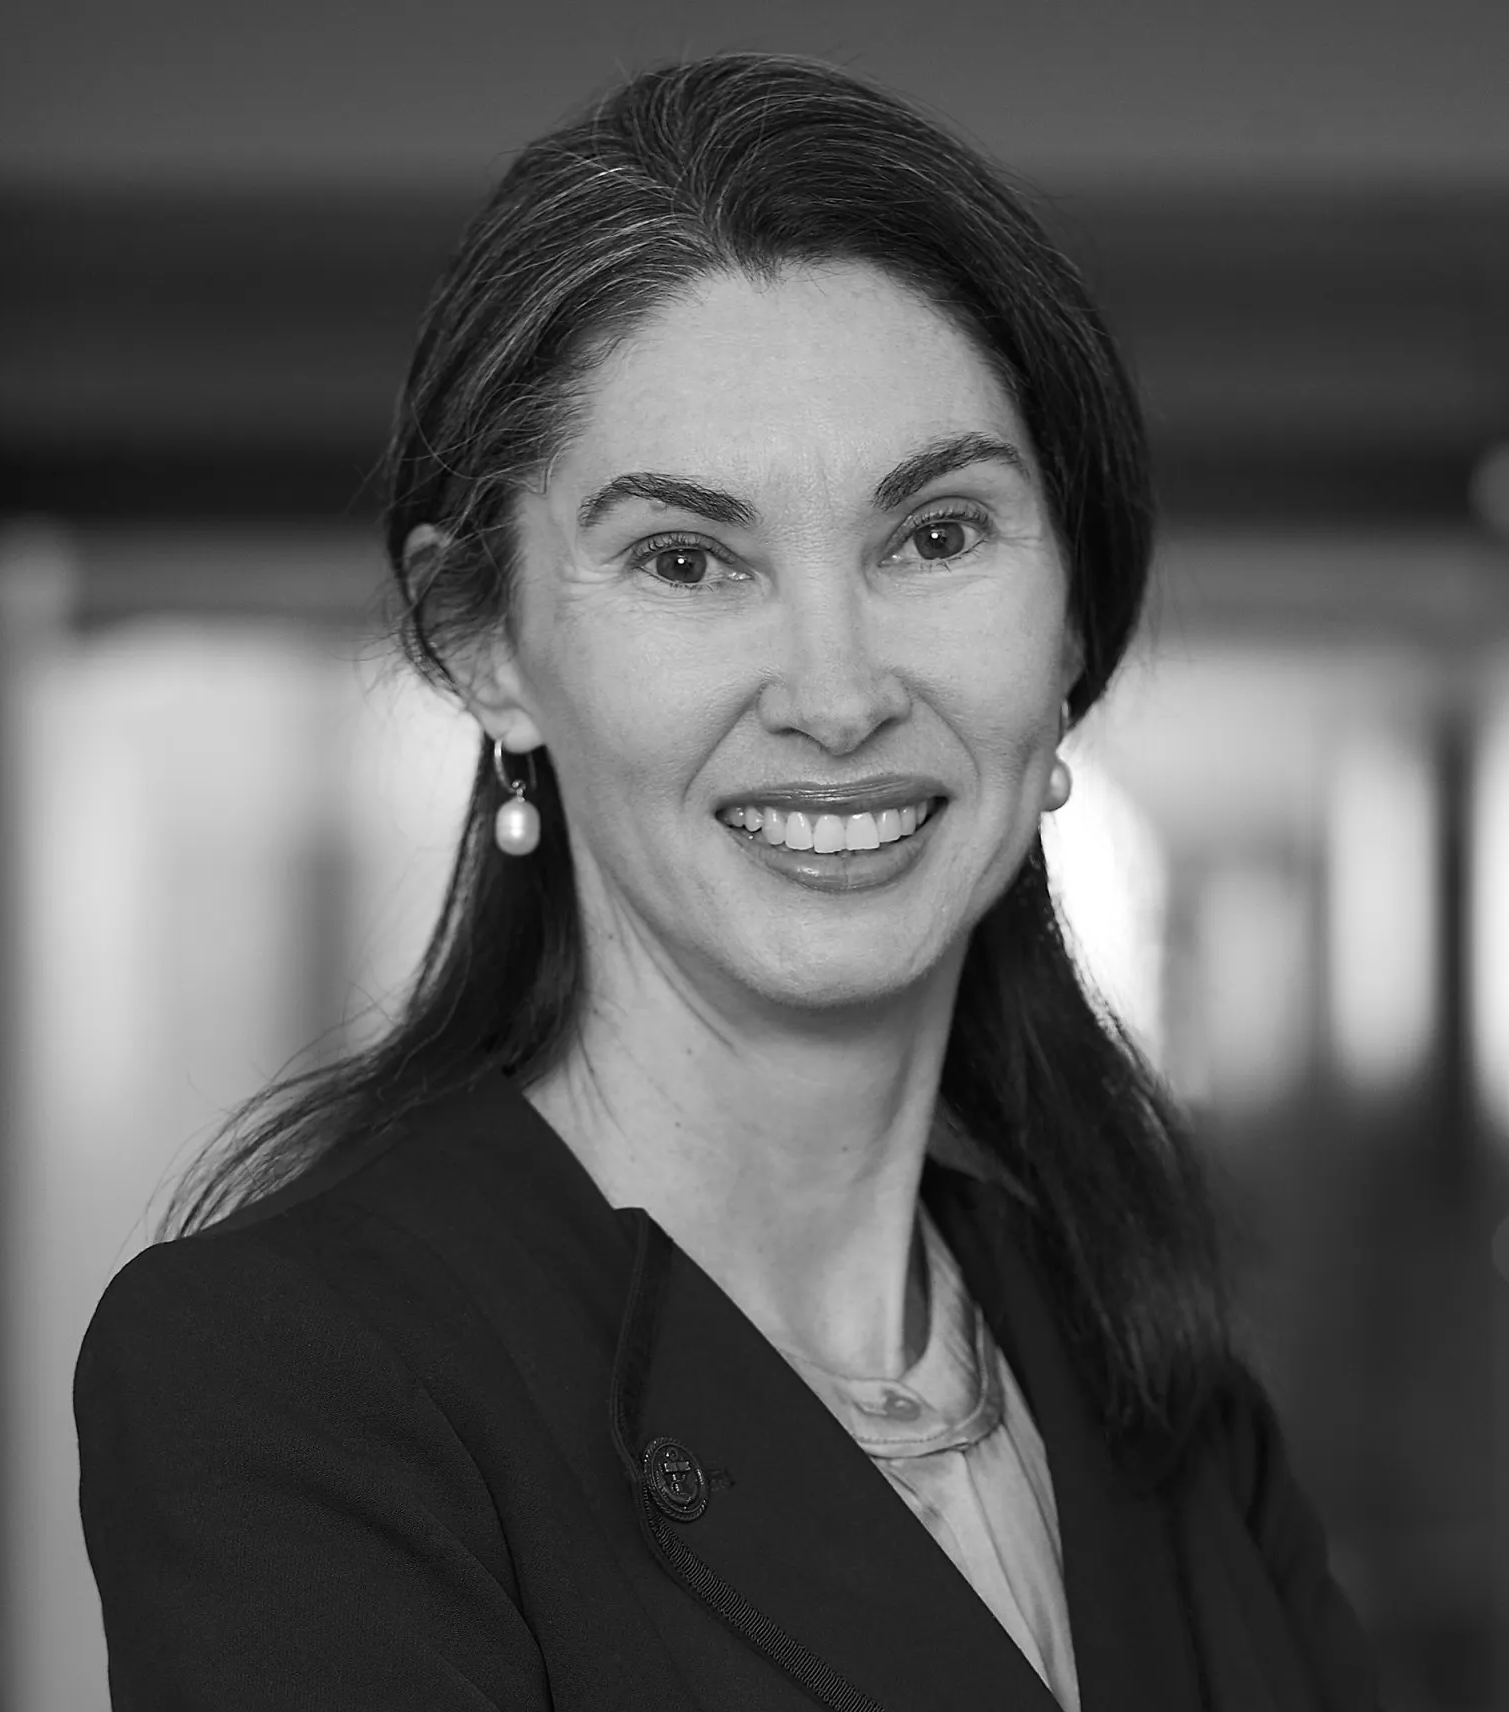 A woman in a suit and earrings is smiling in a black and white photo.